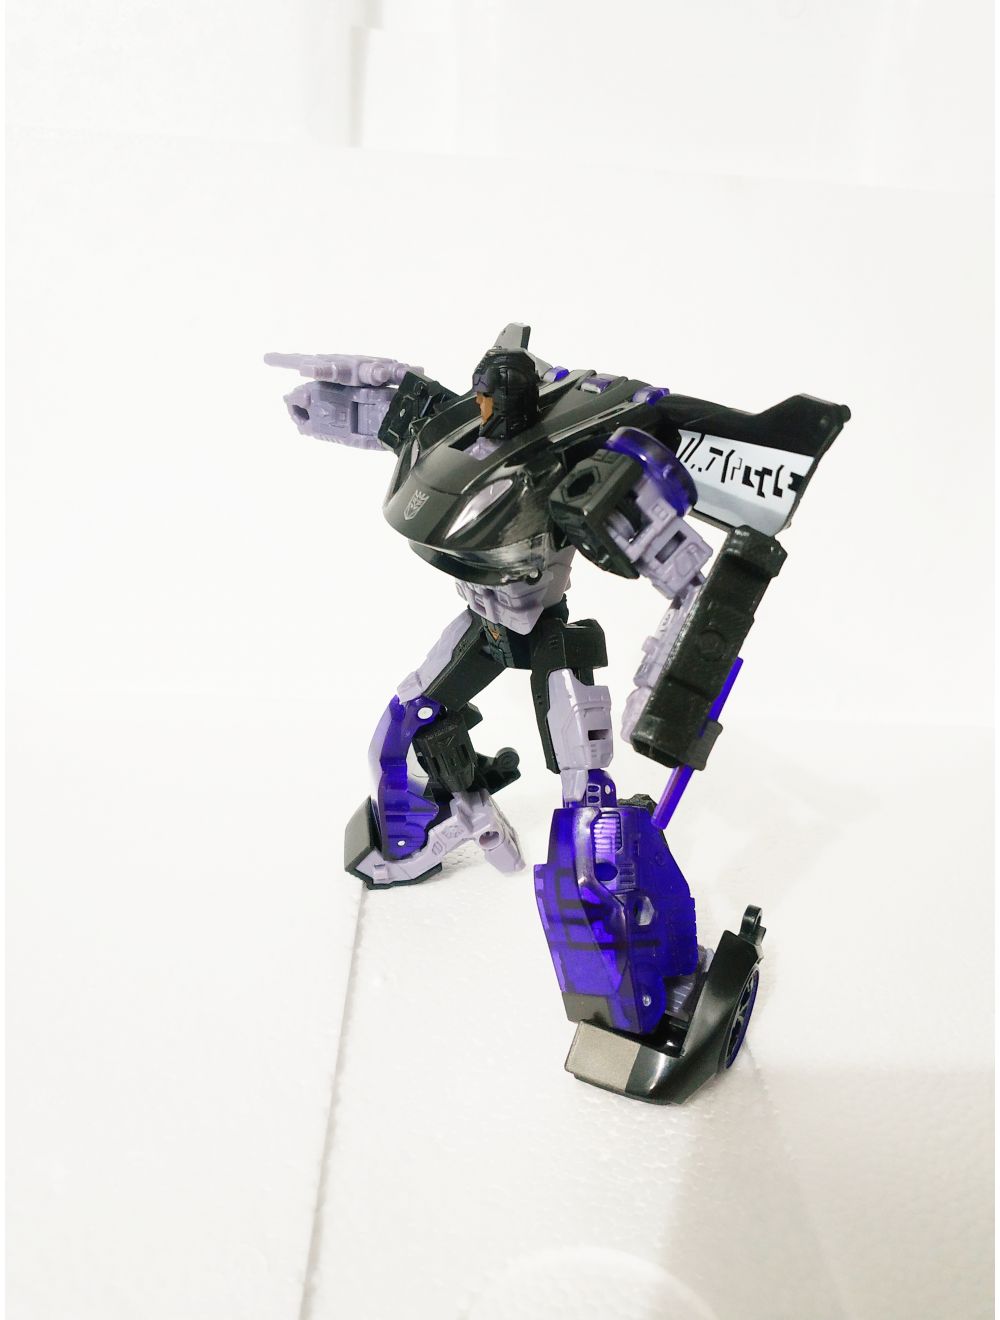 ROS-10 upgrade kit for siege Barricade/Prowl/Smokescreen,In stock! 